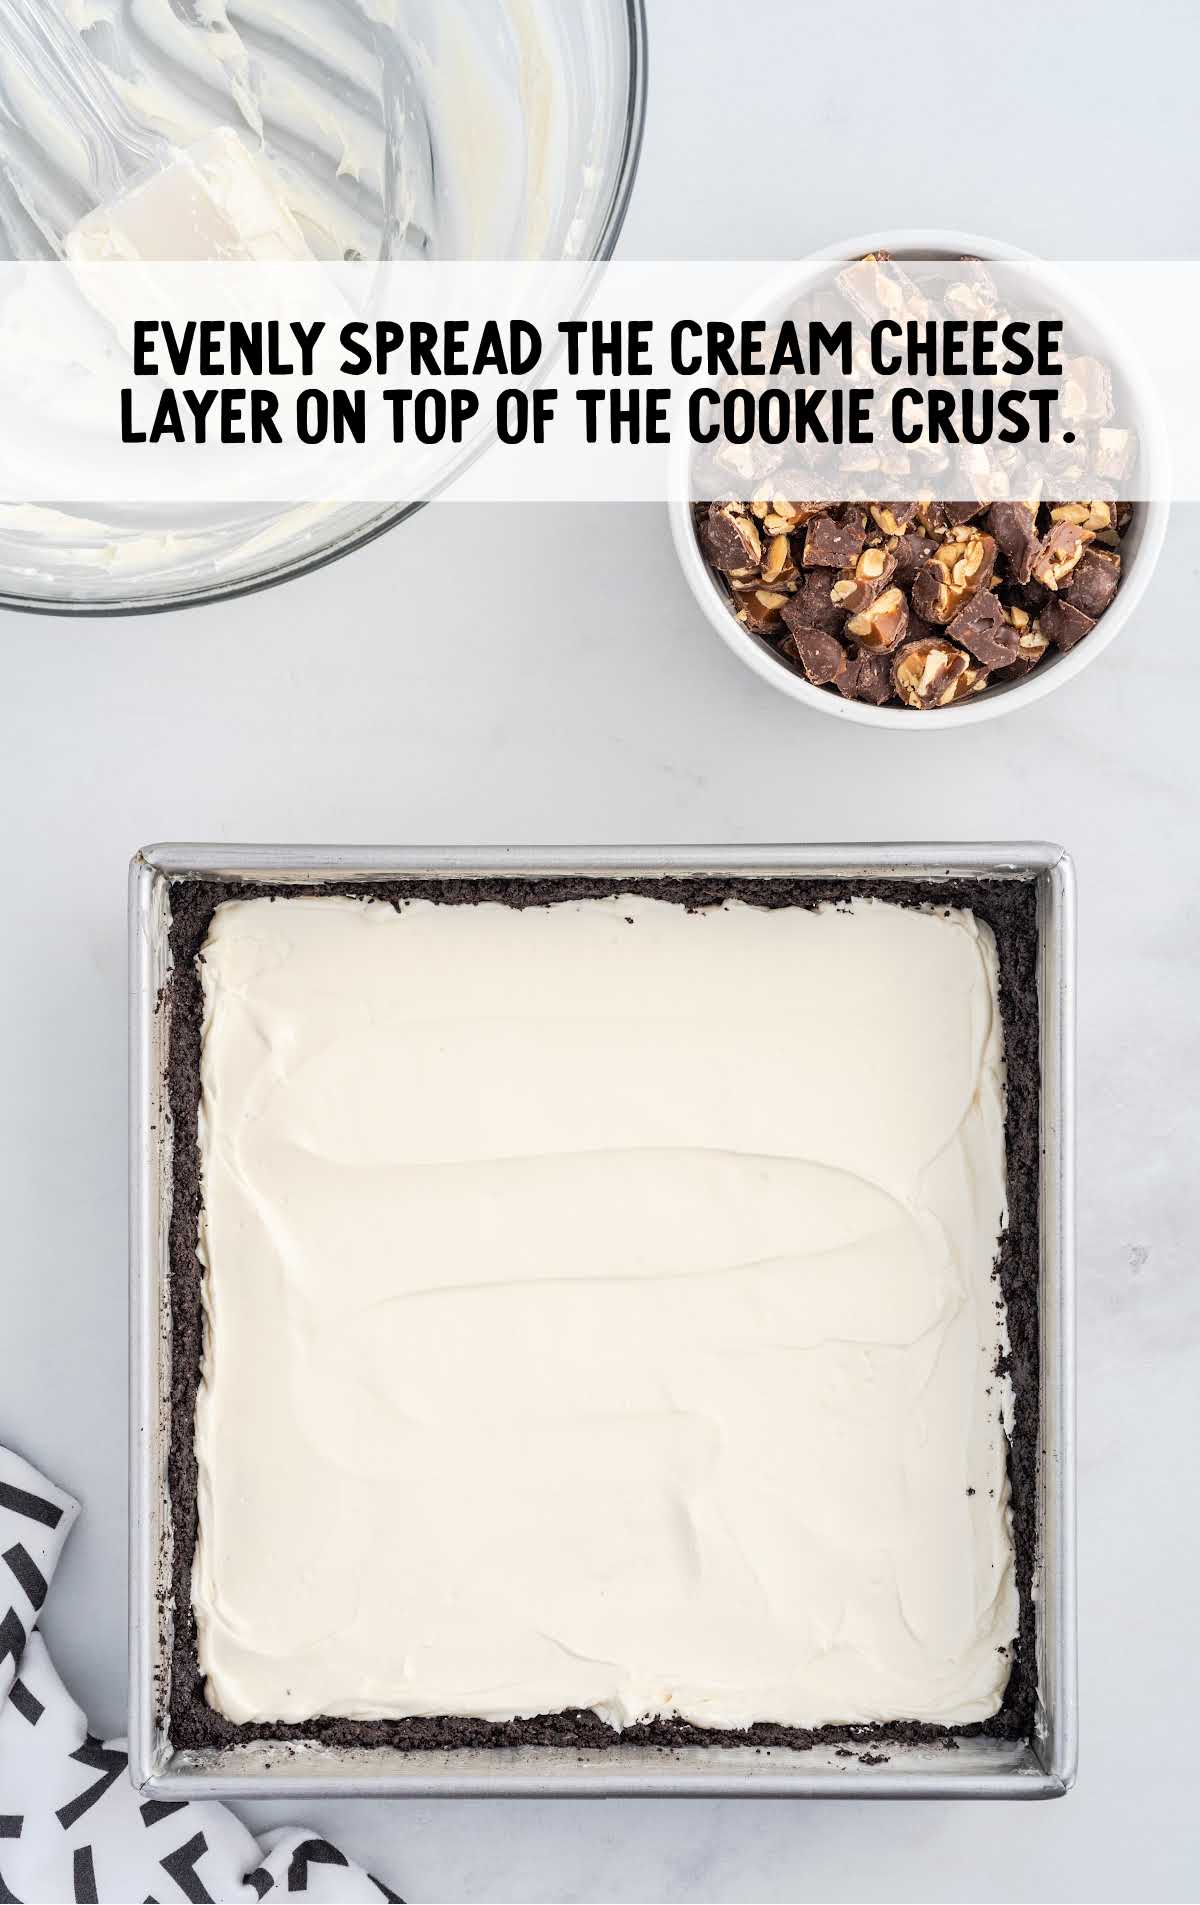 cream cheese layers spread on top of the cookie crust in a baking dish